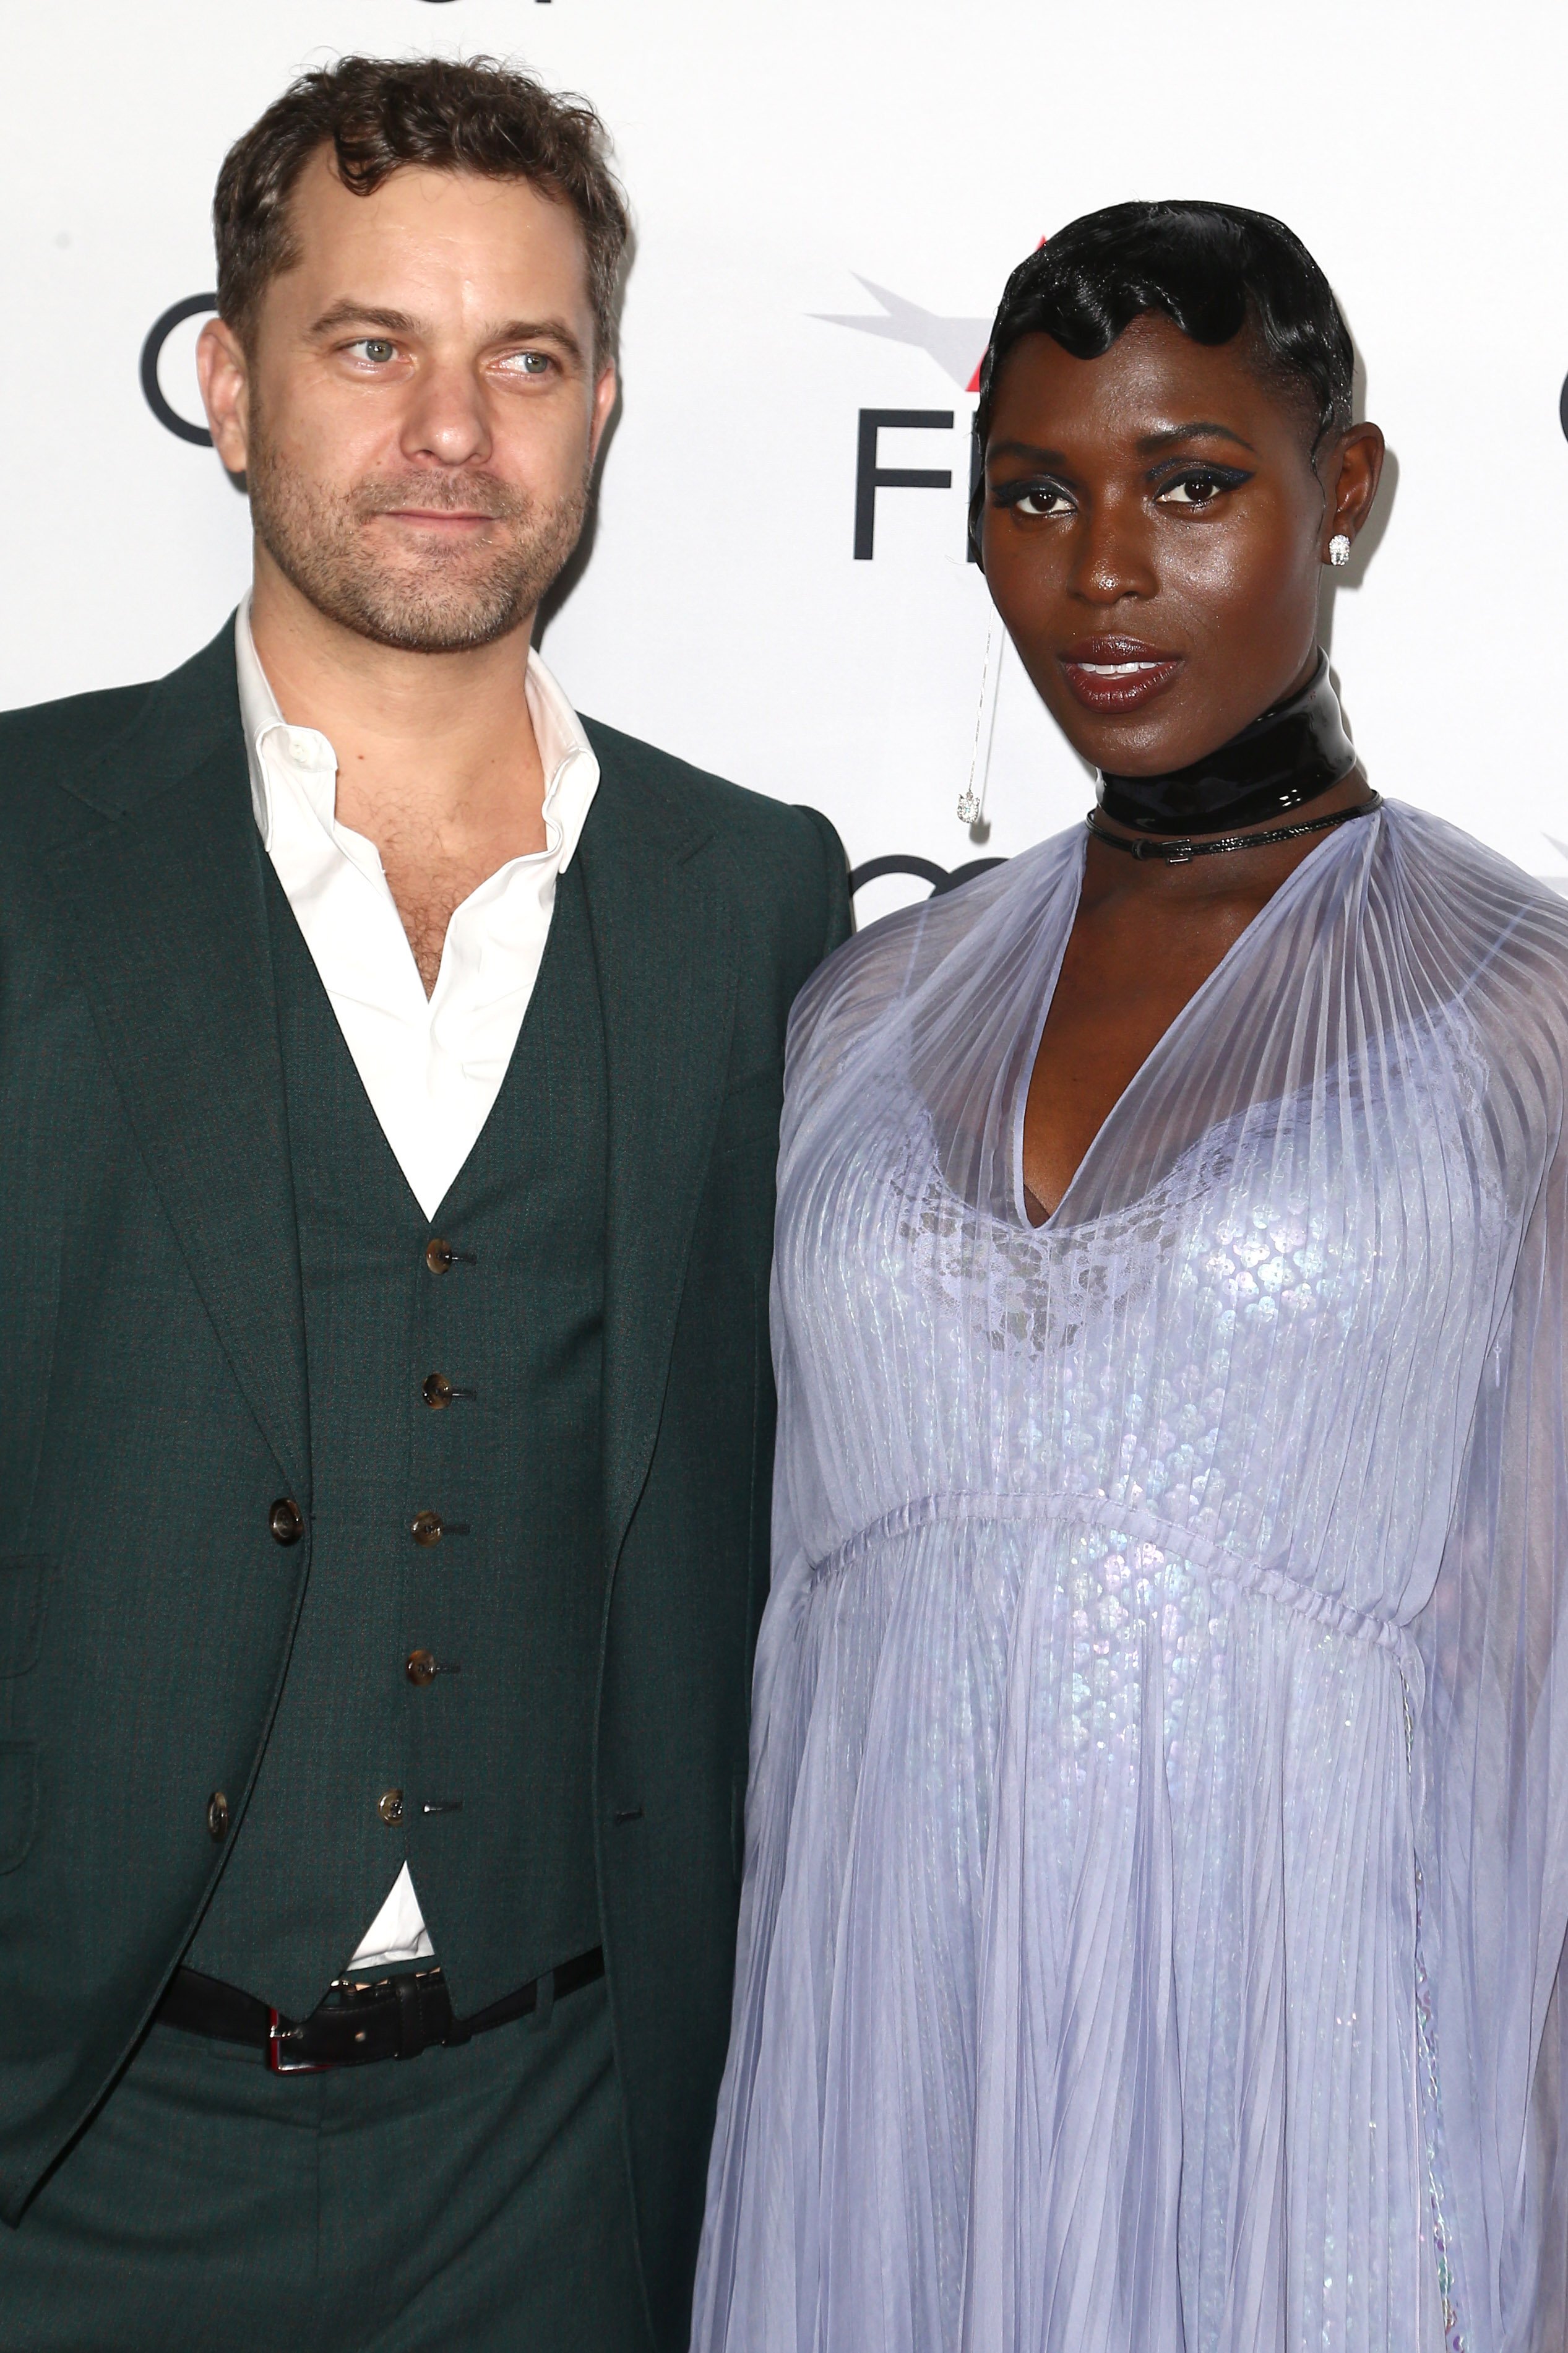 Joshua Jackson and Jodie Turner-Smith at TCL Chinese Theatre on November 14, 2019, in Hollywood, California. | Source: Getty Images